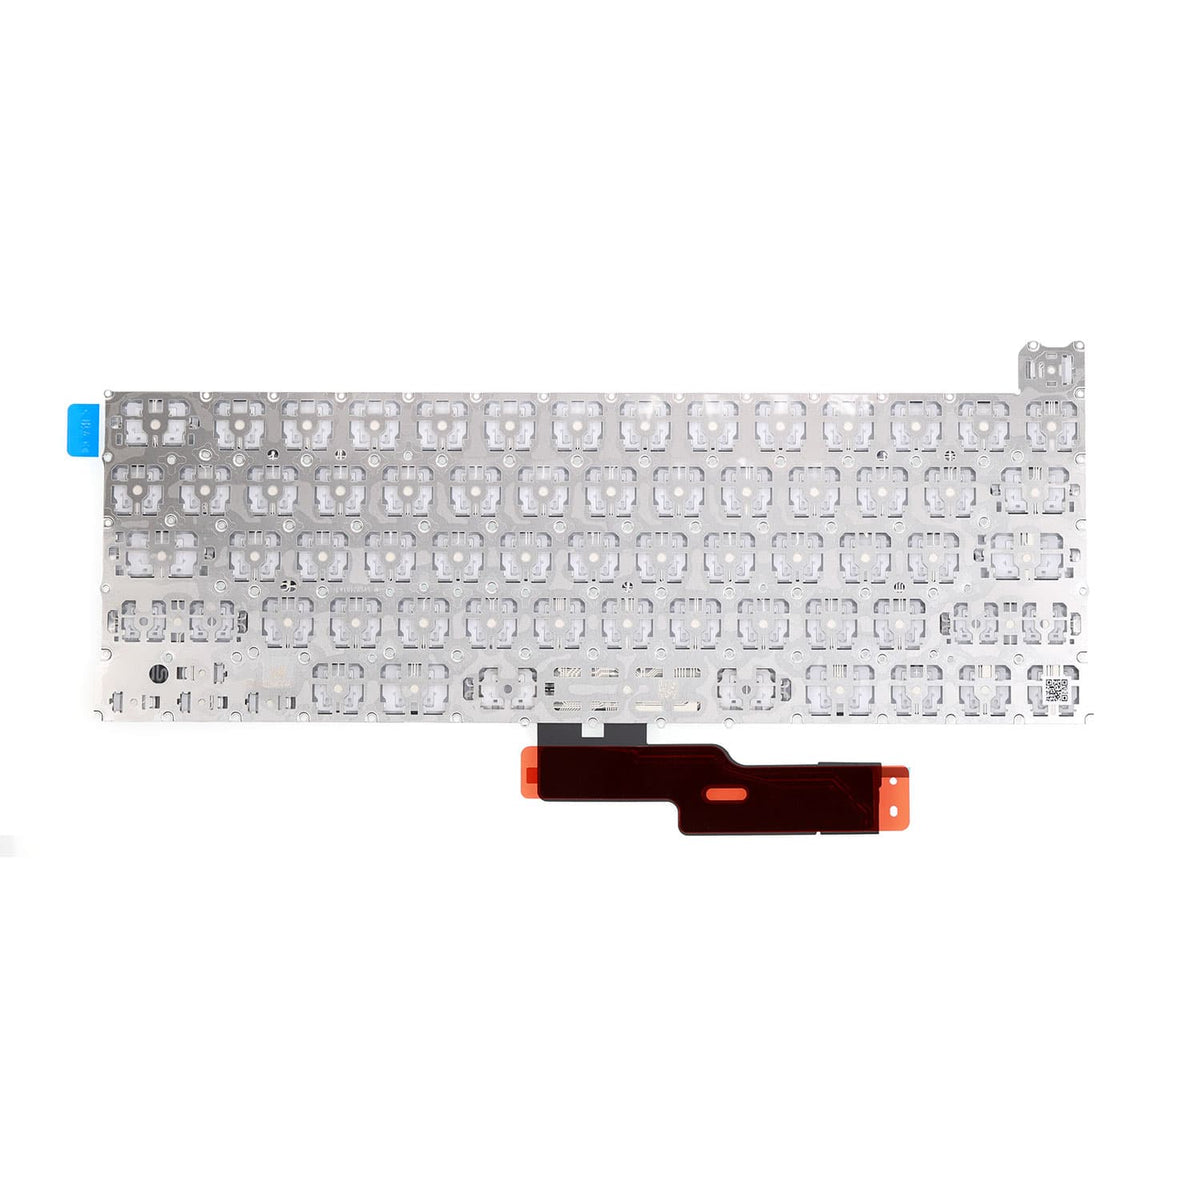 KEYBOARD (US ENGLISH) FOR MACBOOK PRO A2289 EARLY 2020